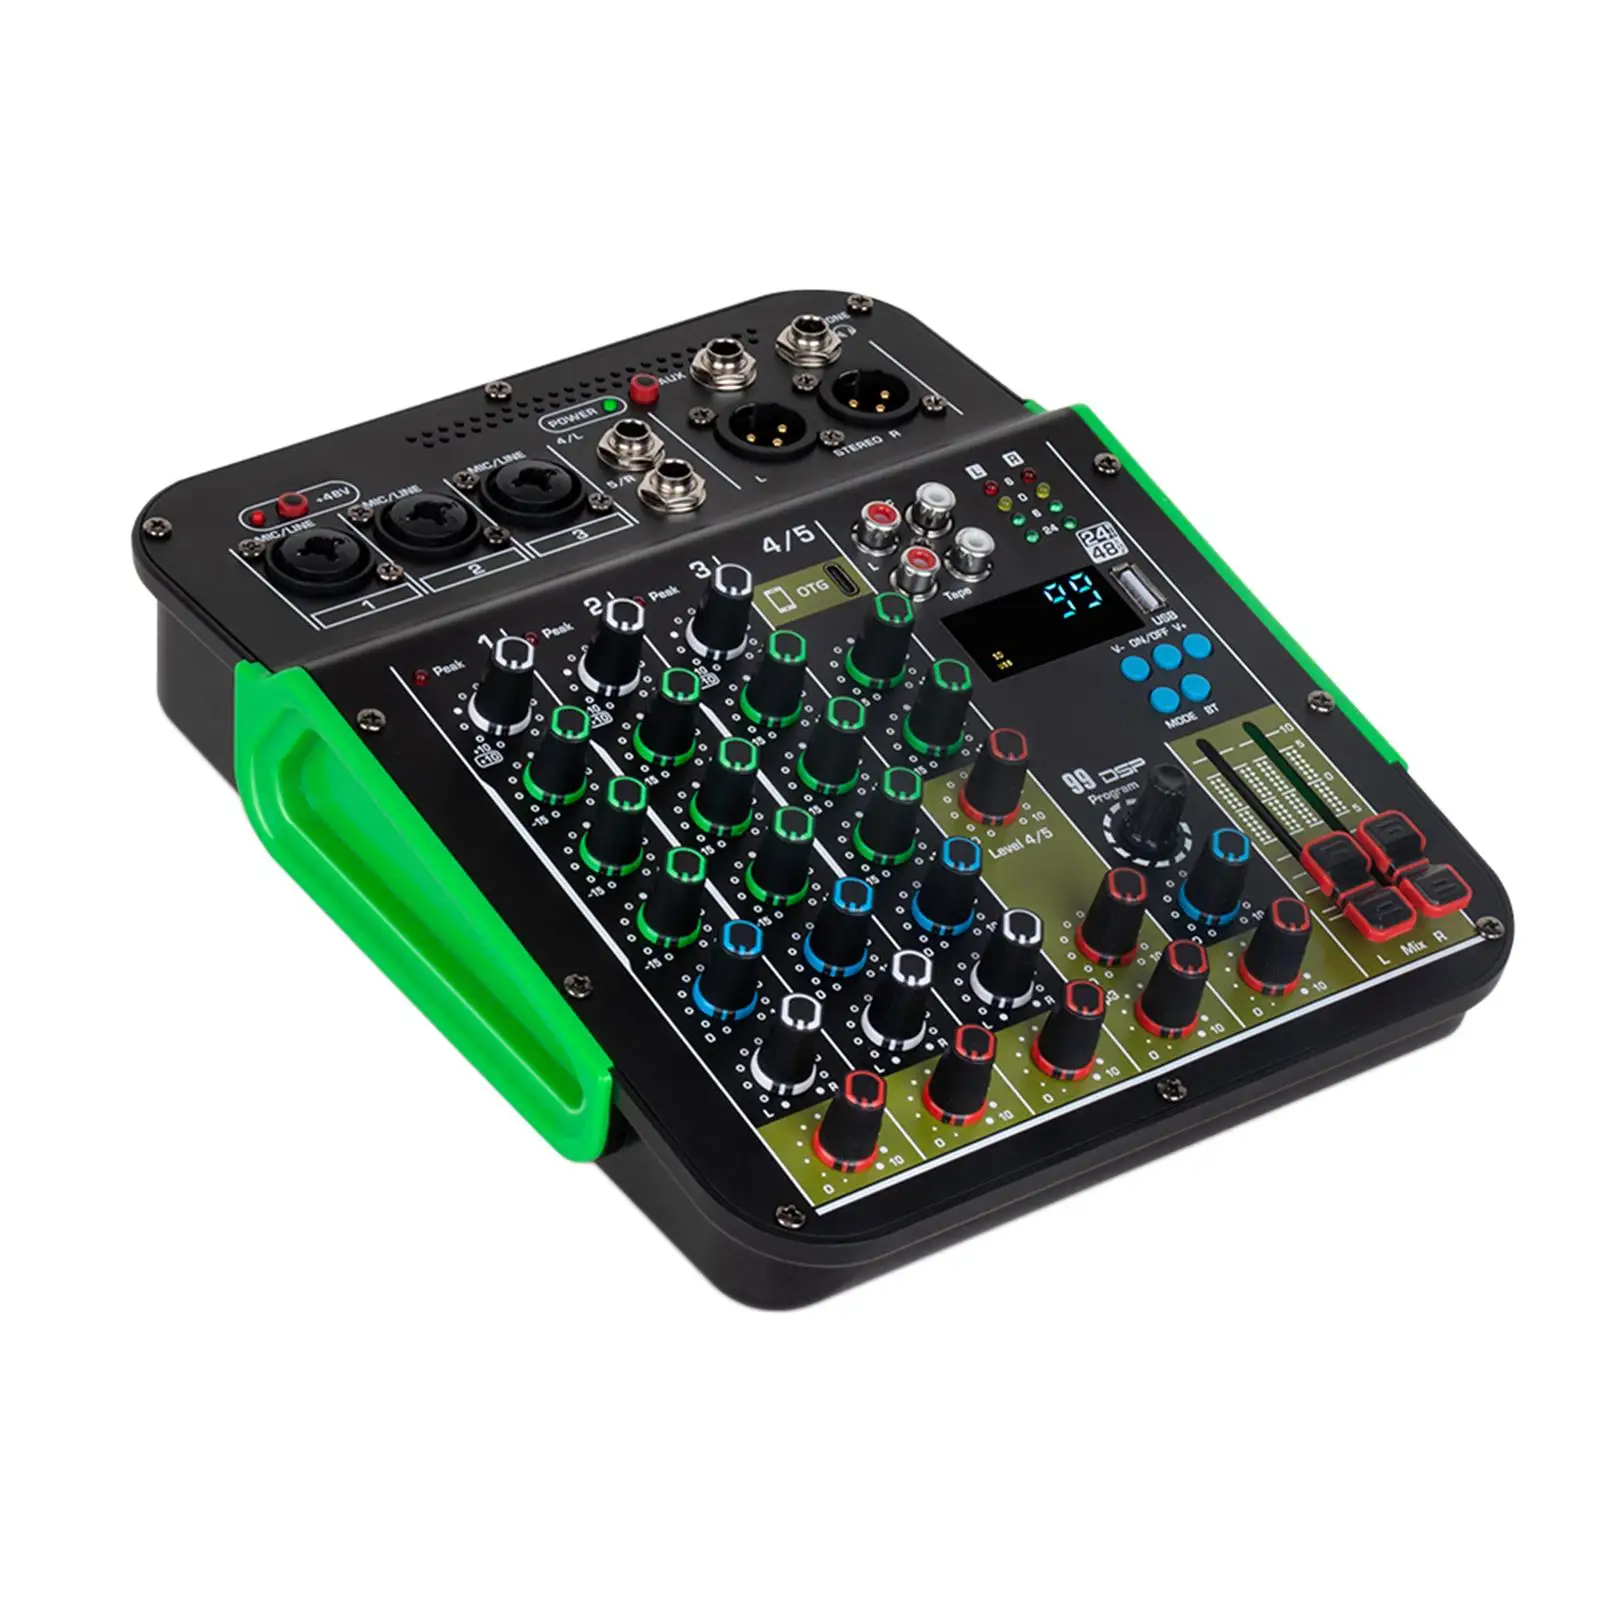 5 Channel Mixer Digital Mixer Instant Listening Audio Source Adjustment USB for Small Clubs or Bars Multifunctional 48V Power EU